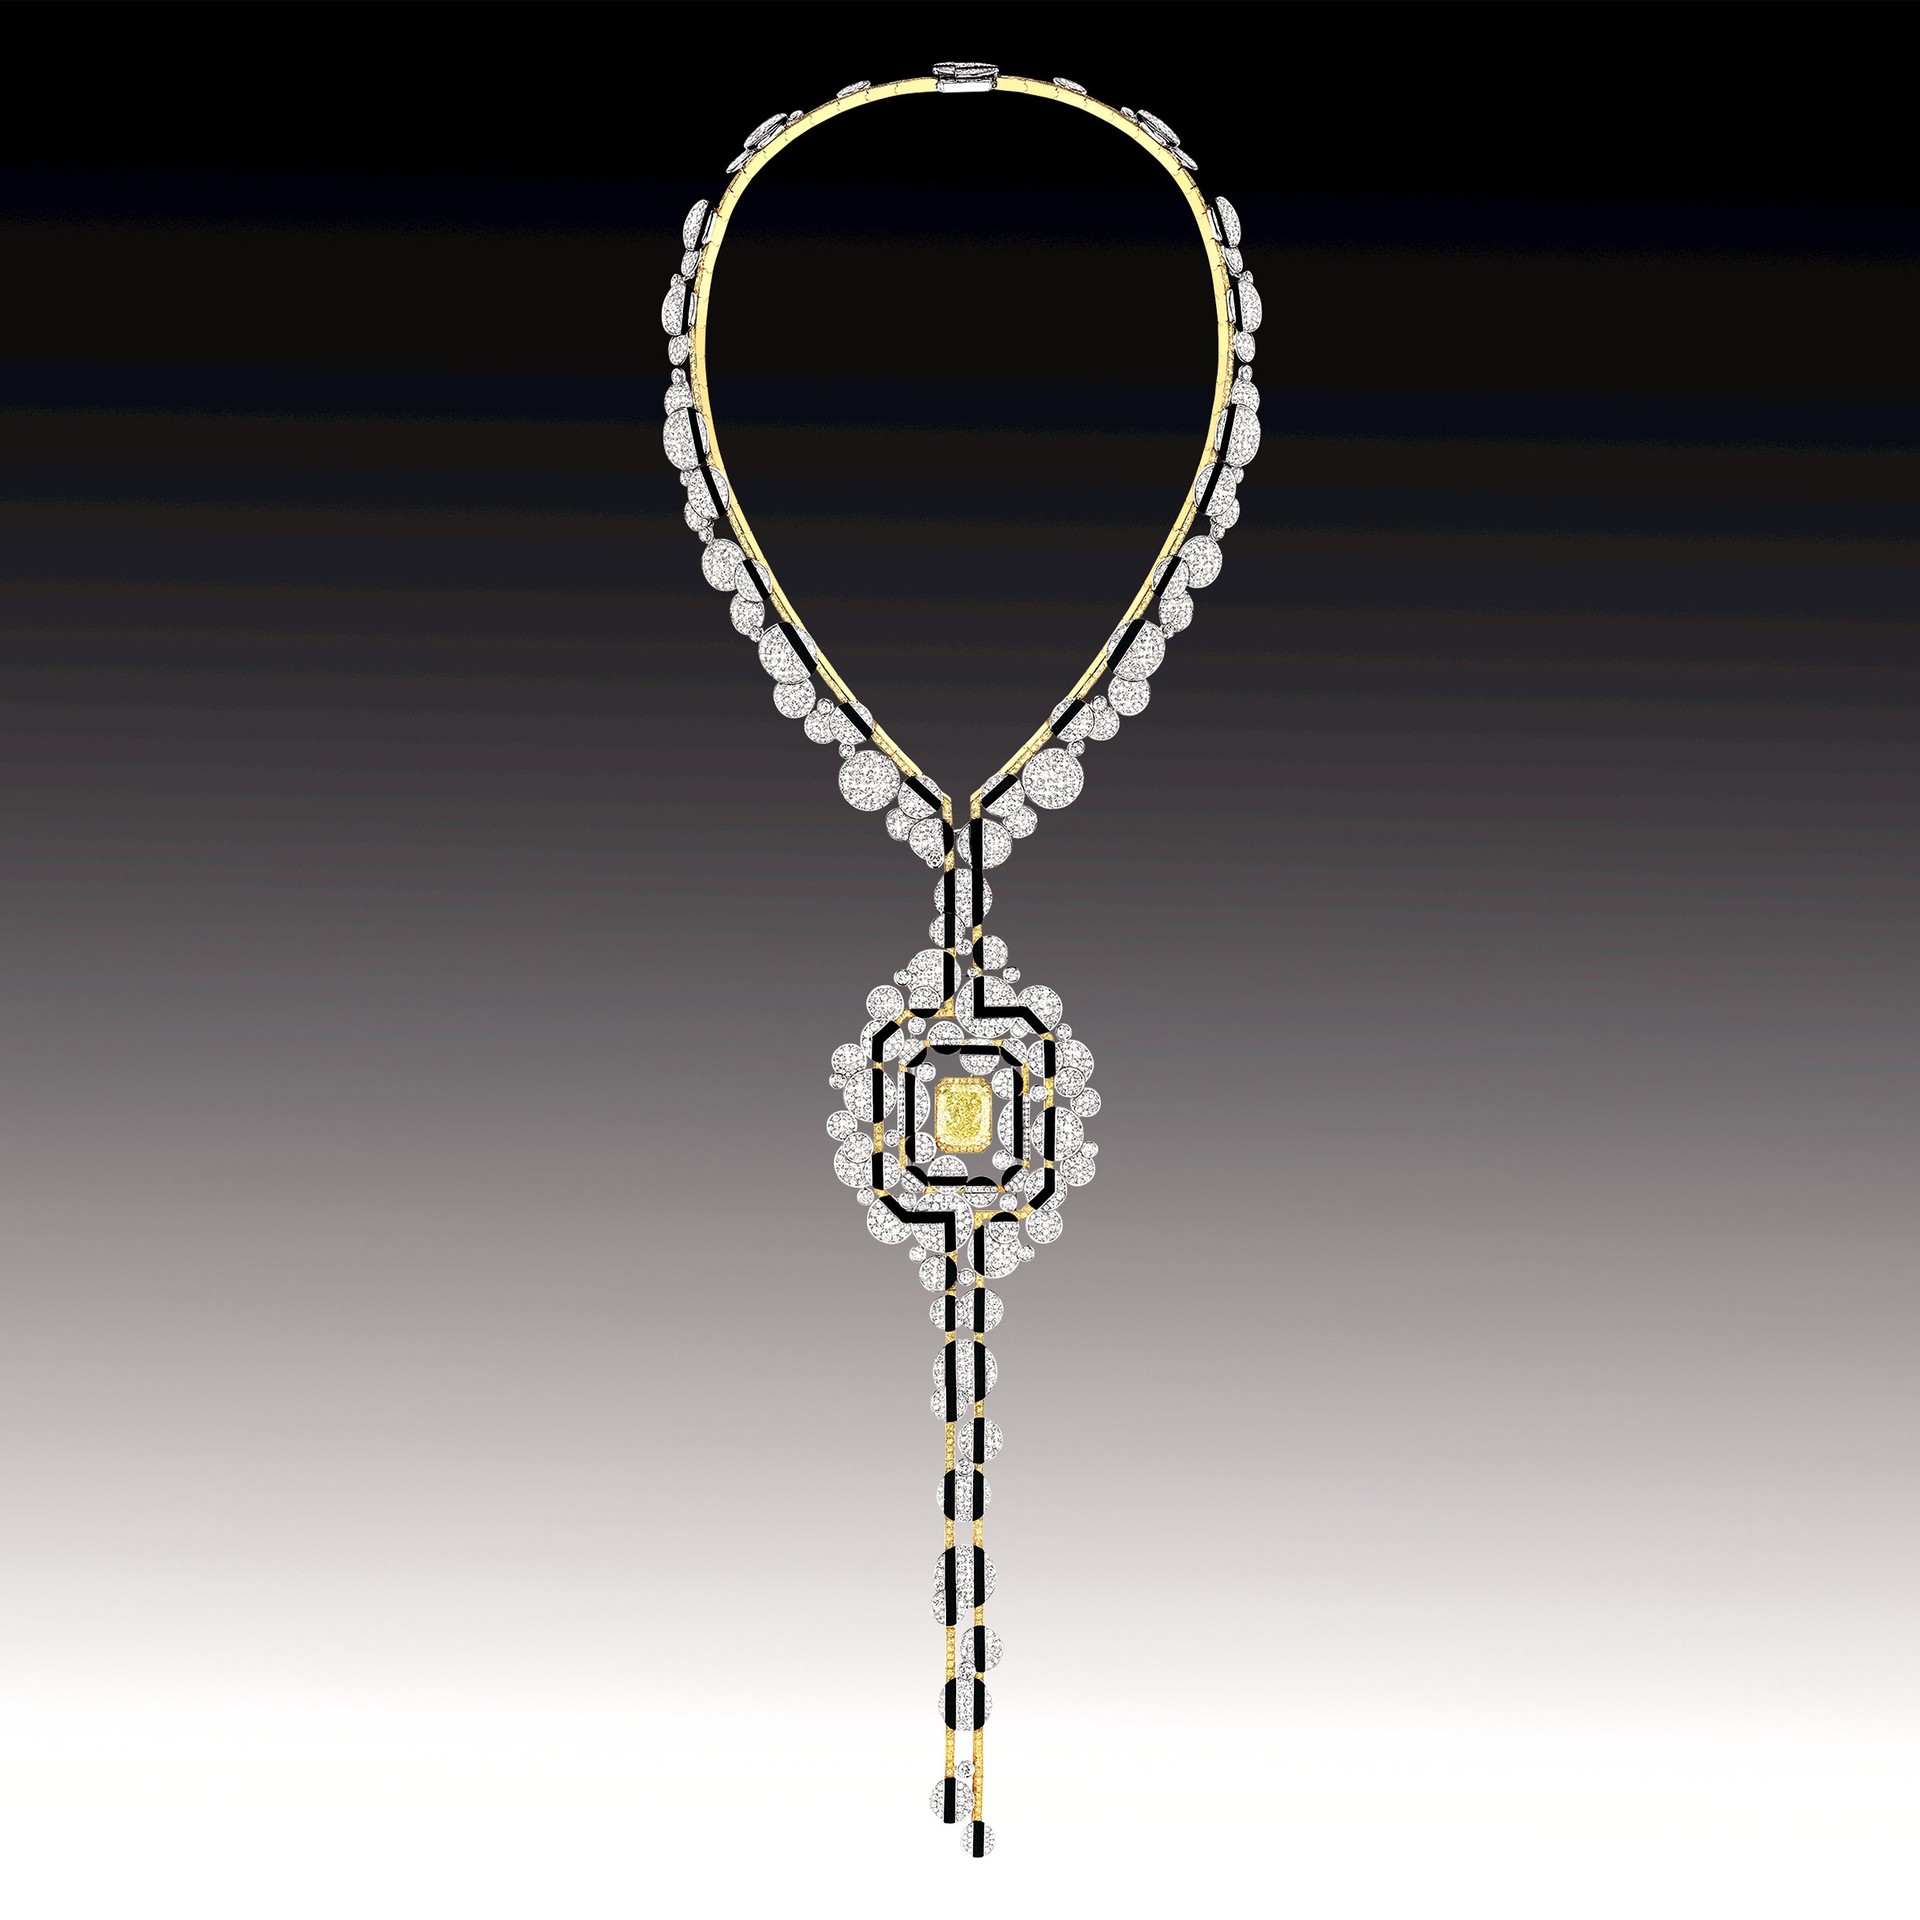 Morning in Vendome necklace in 18-carat white and yellow gold with an emerald-cut 12-carat yellow diamond, carved onyx and 2,160 brilliant-cut diamonds  (Foto: Credit: Chanel Fine Jewellery)